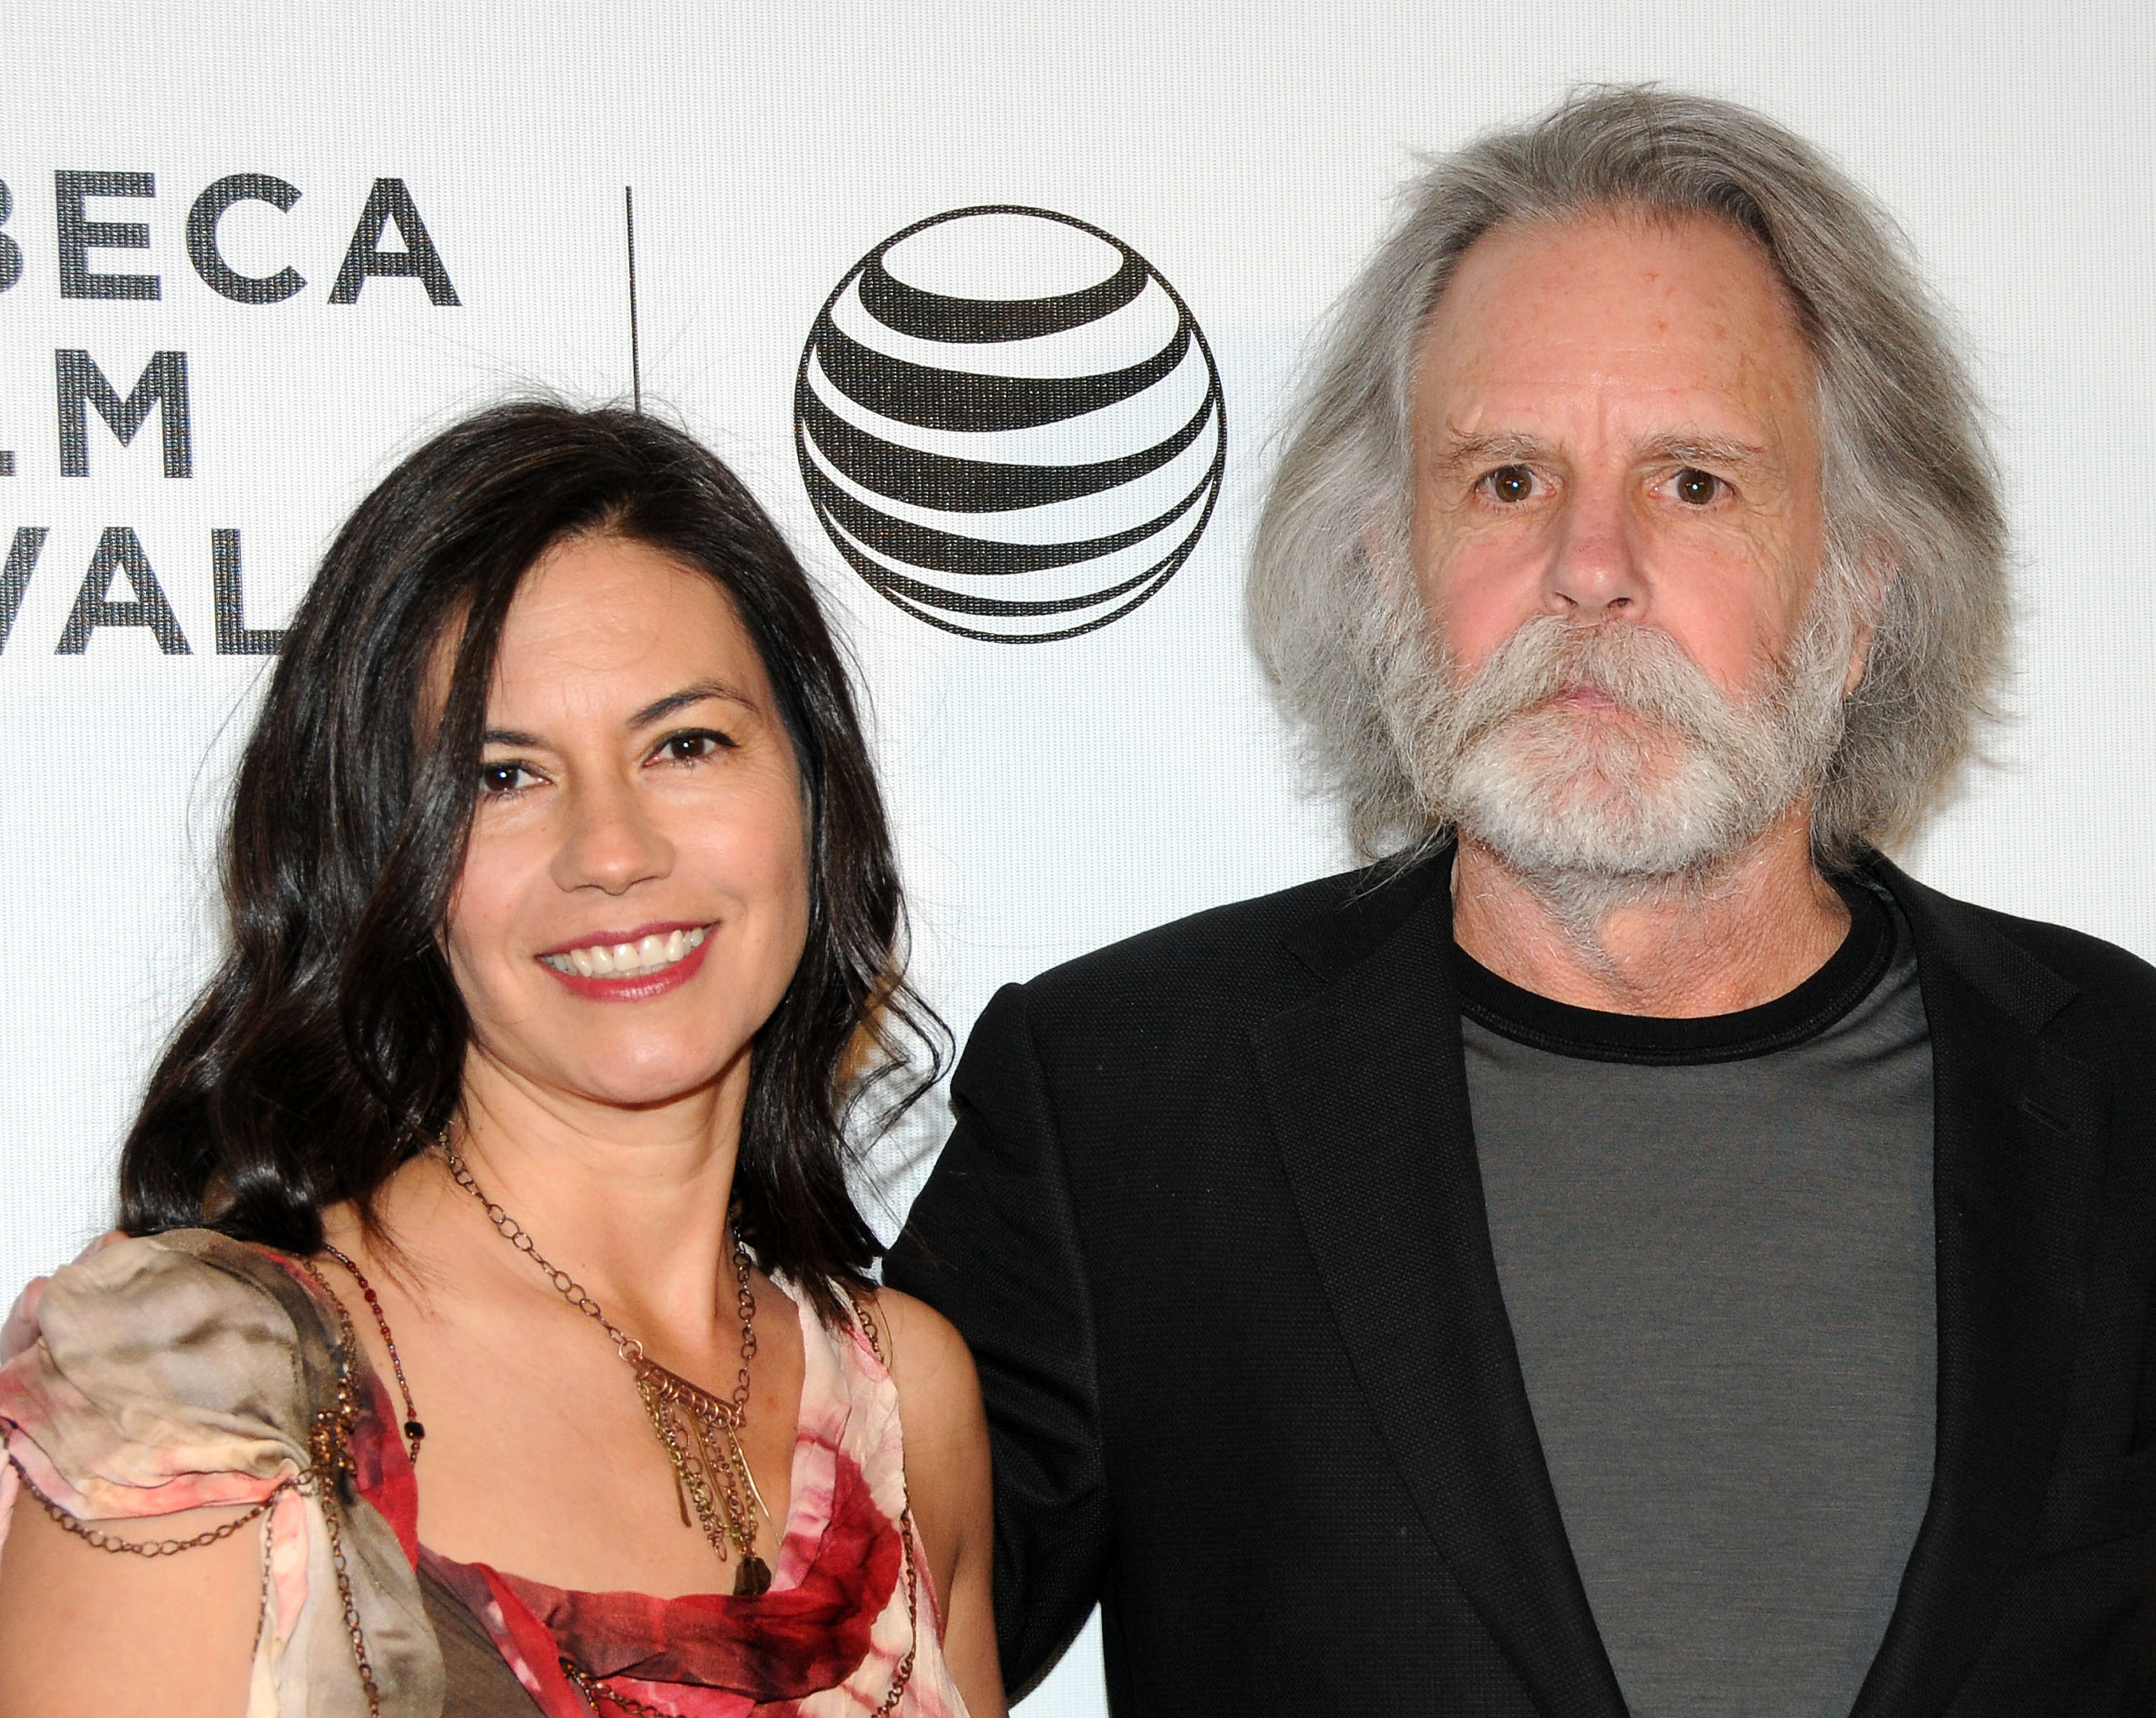 Bob Weir and Natascha Munter at the screening of "The Other One: The Long, Strange Trip of Bob Weir" during the 2014 Tribeca Film Festival on April 23, 2014, in New York City | Source: Getty Images